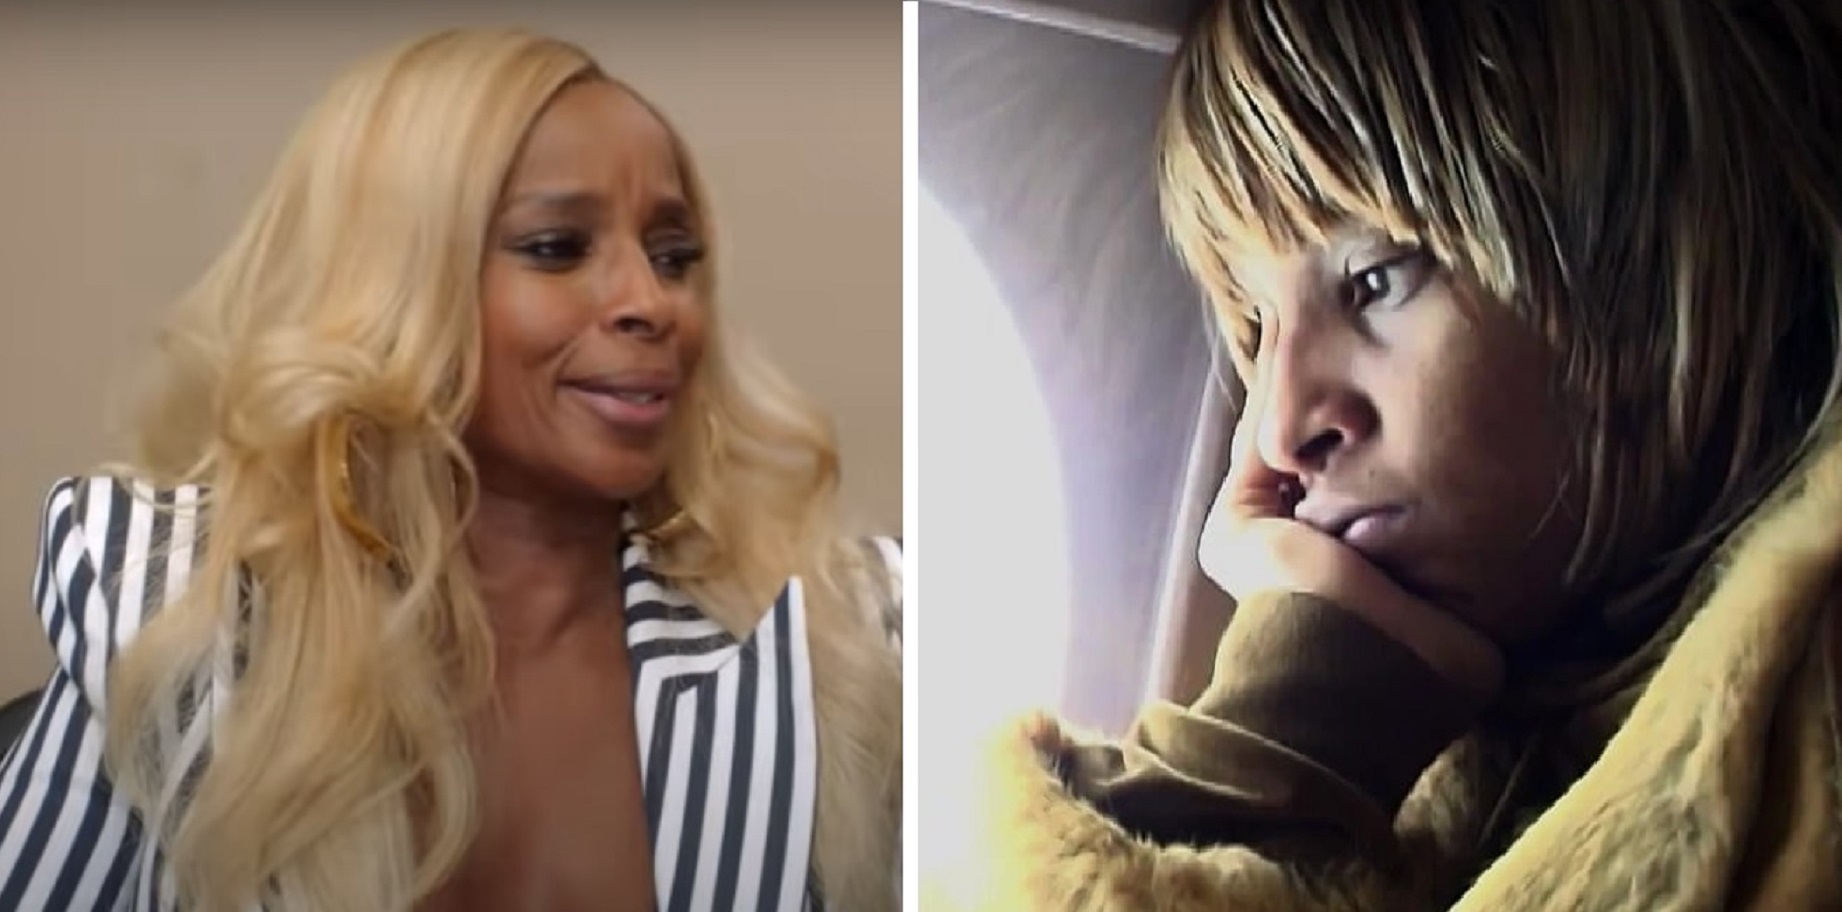 Watch: Mary J. Blige’s Life Reflected In Emotional New Documentary, ‘My Life’ [Trailer]